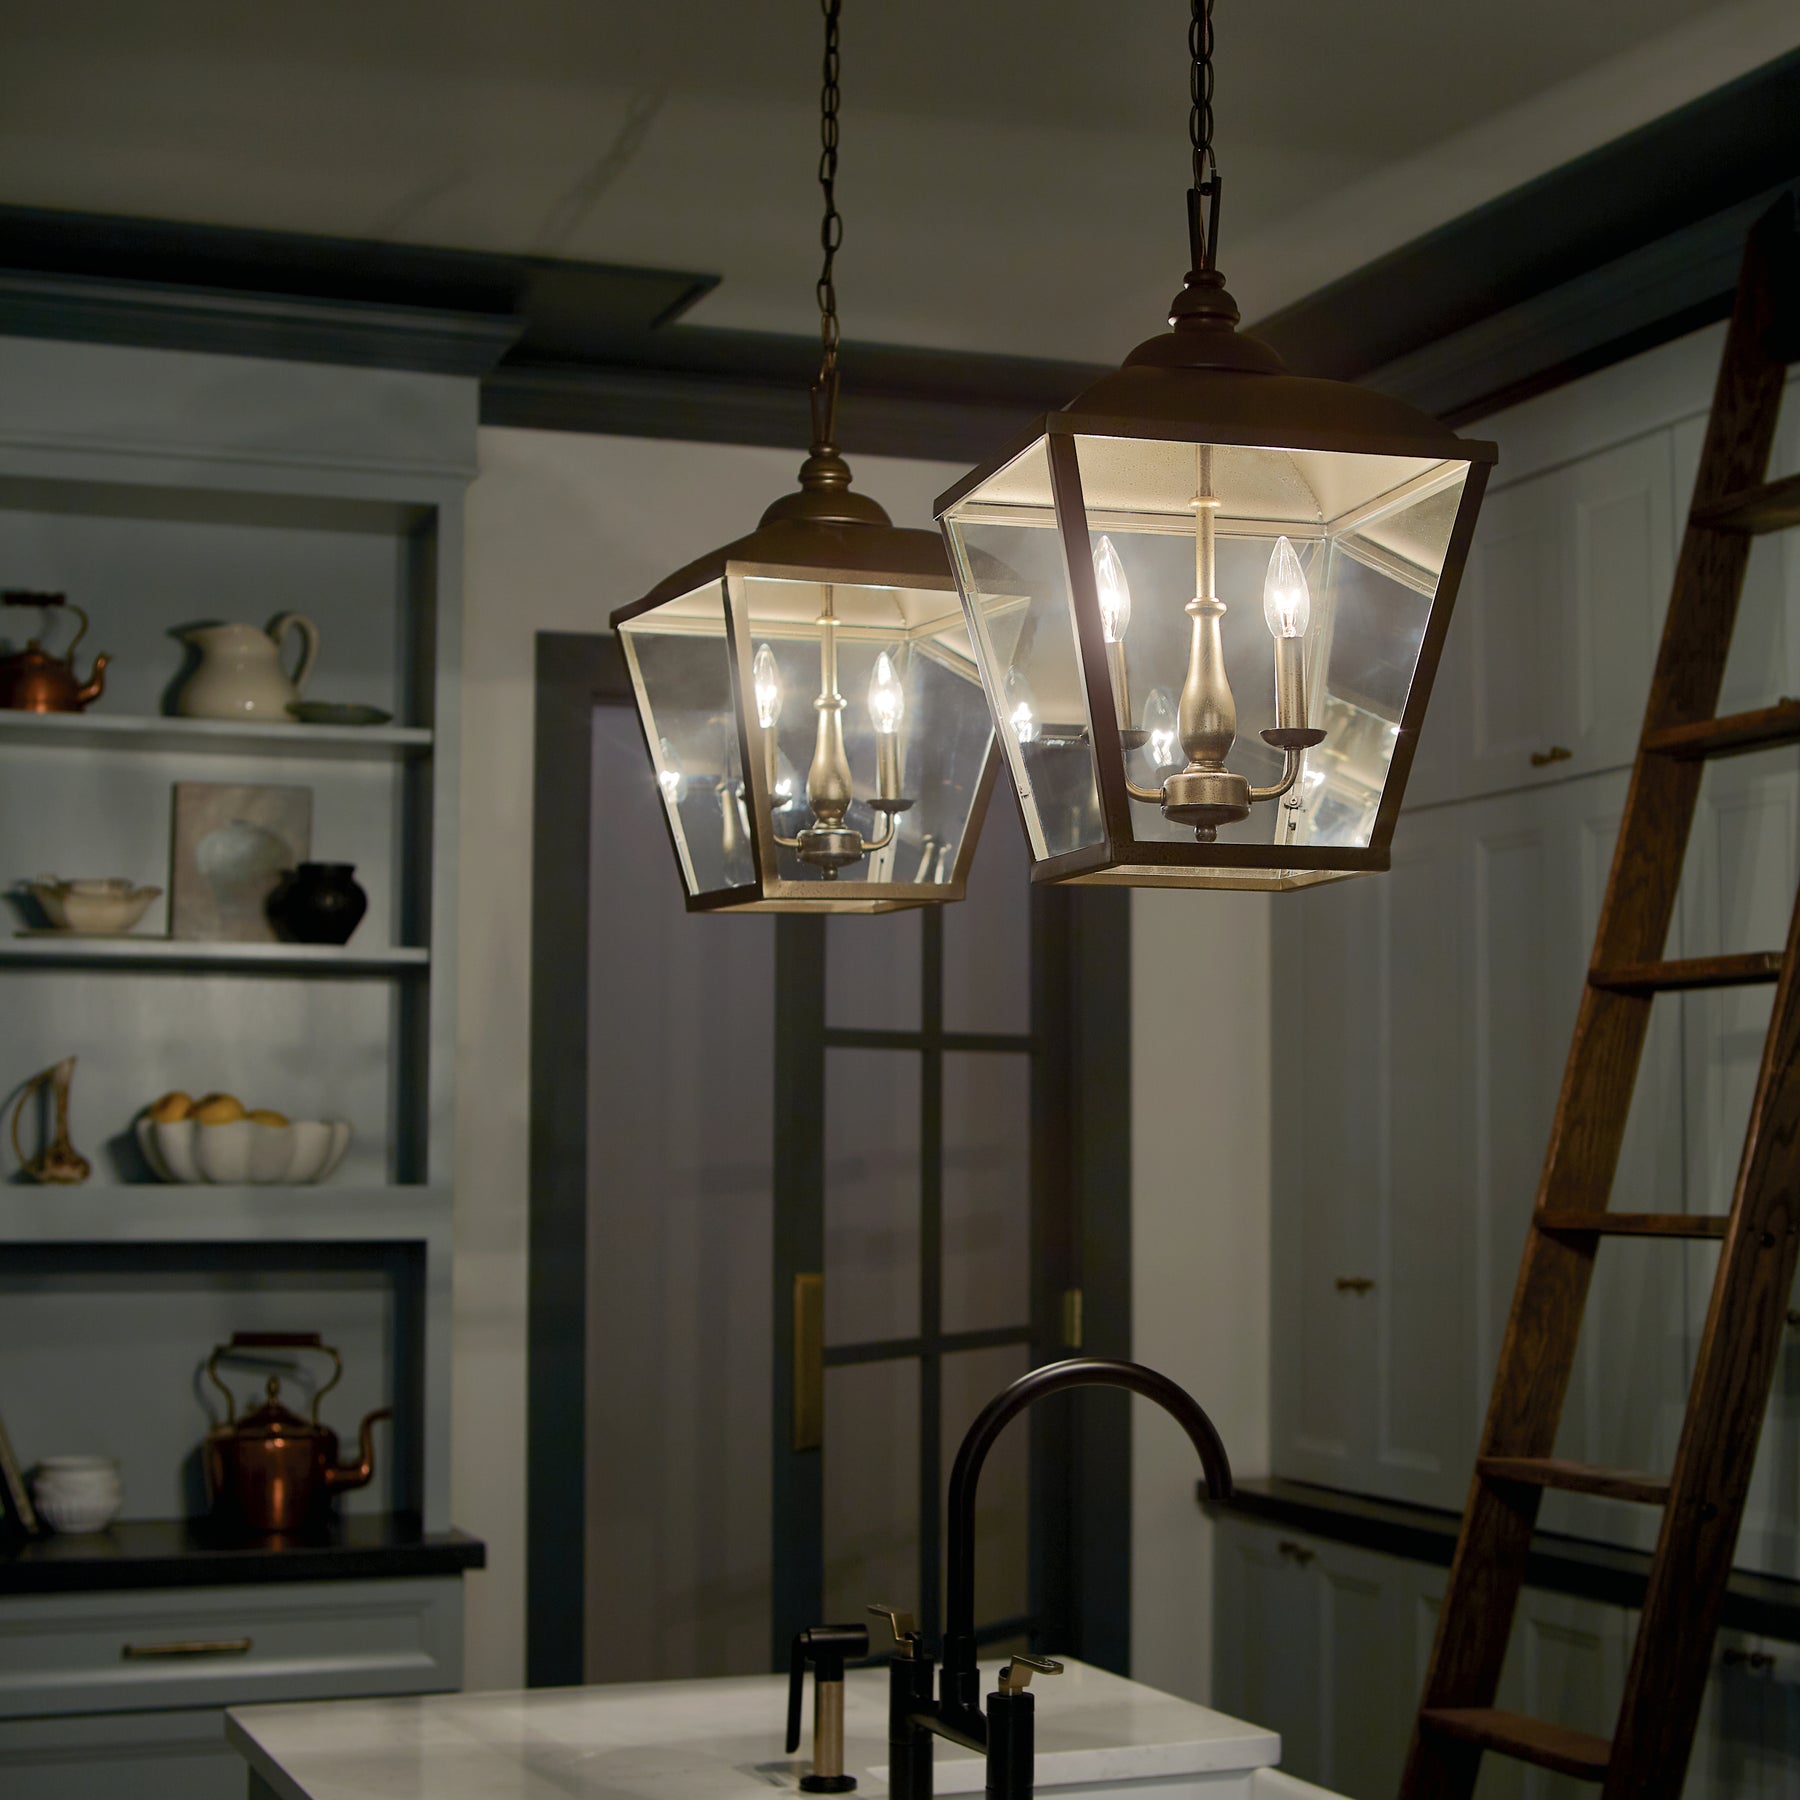 How to Know When it's Time to Upgrade Your Lighting